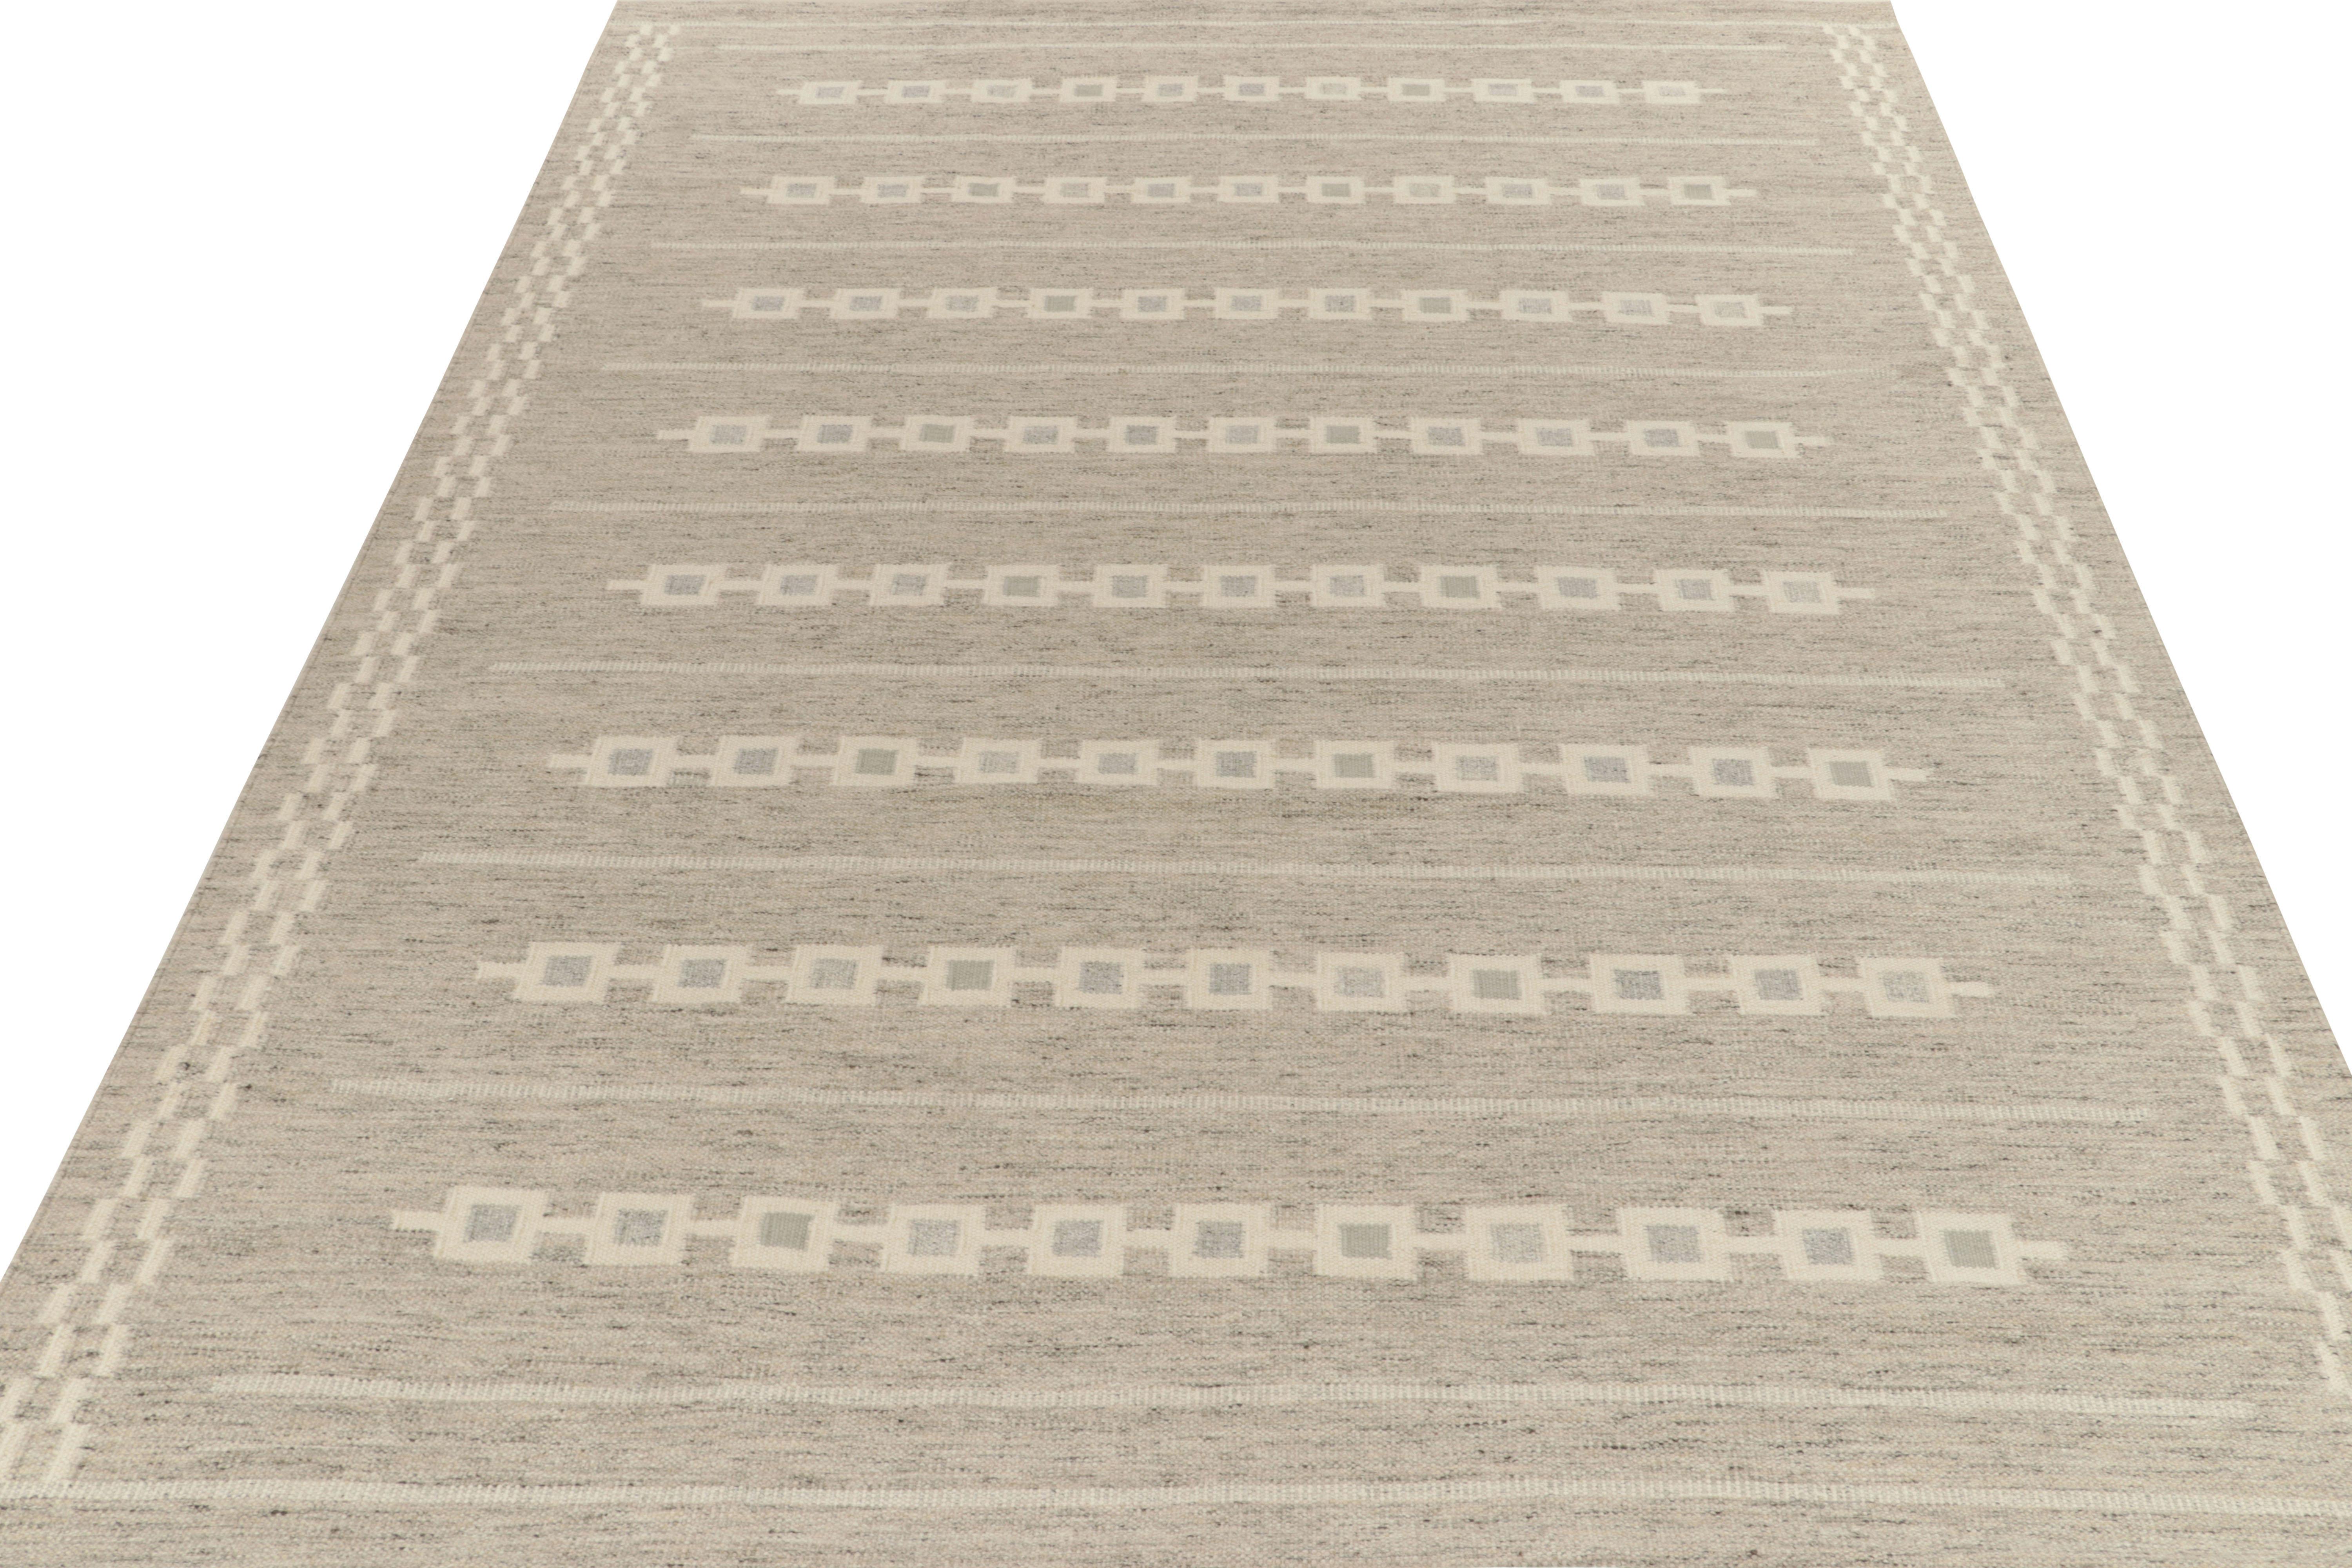 Handwoven in fine quality wool, a custom design from Rug & Kilim’s celebrated Scandinavian flat weave collection. Exemplified in this former 10x14 scale, the vision relishes a clean, forgiving look with horizontal stripes and chain series in gray &